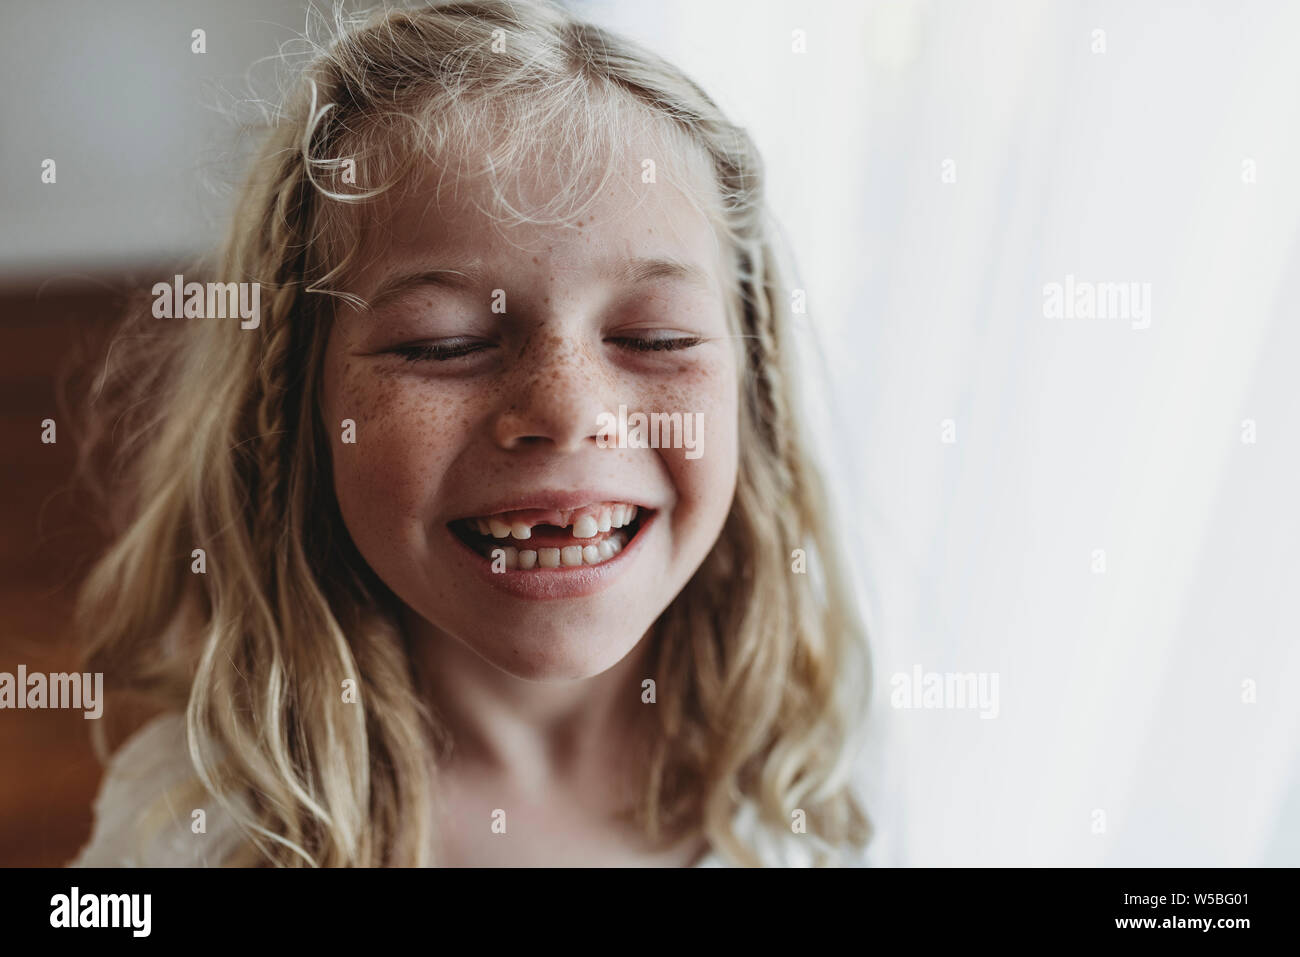 Portrait of young freckled smiling girl missing tooth with eyes closed Stock Photo